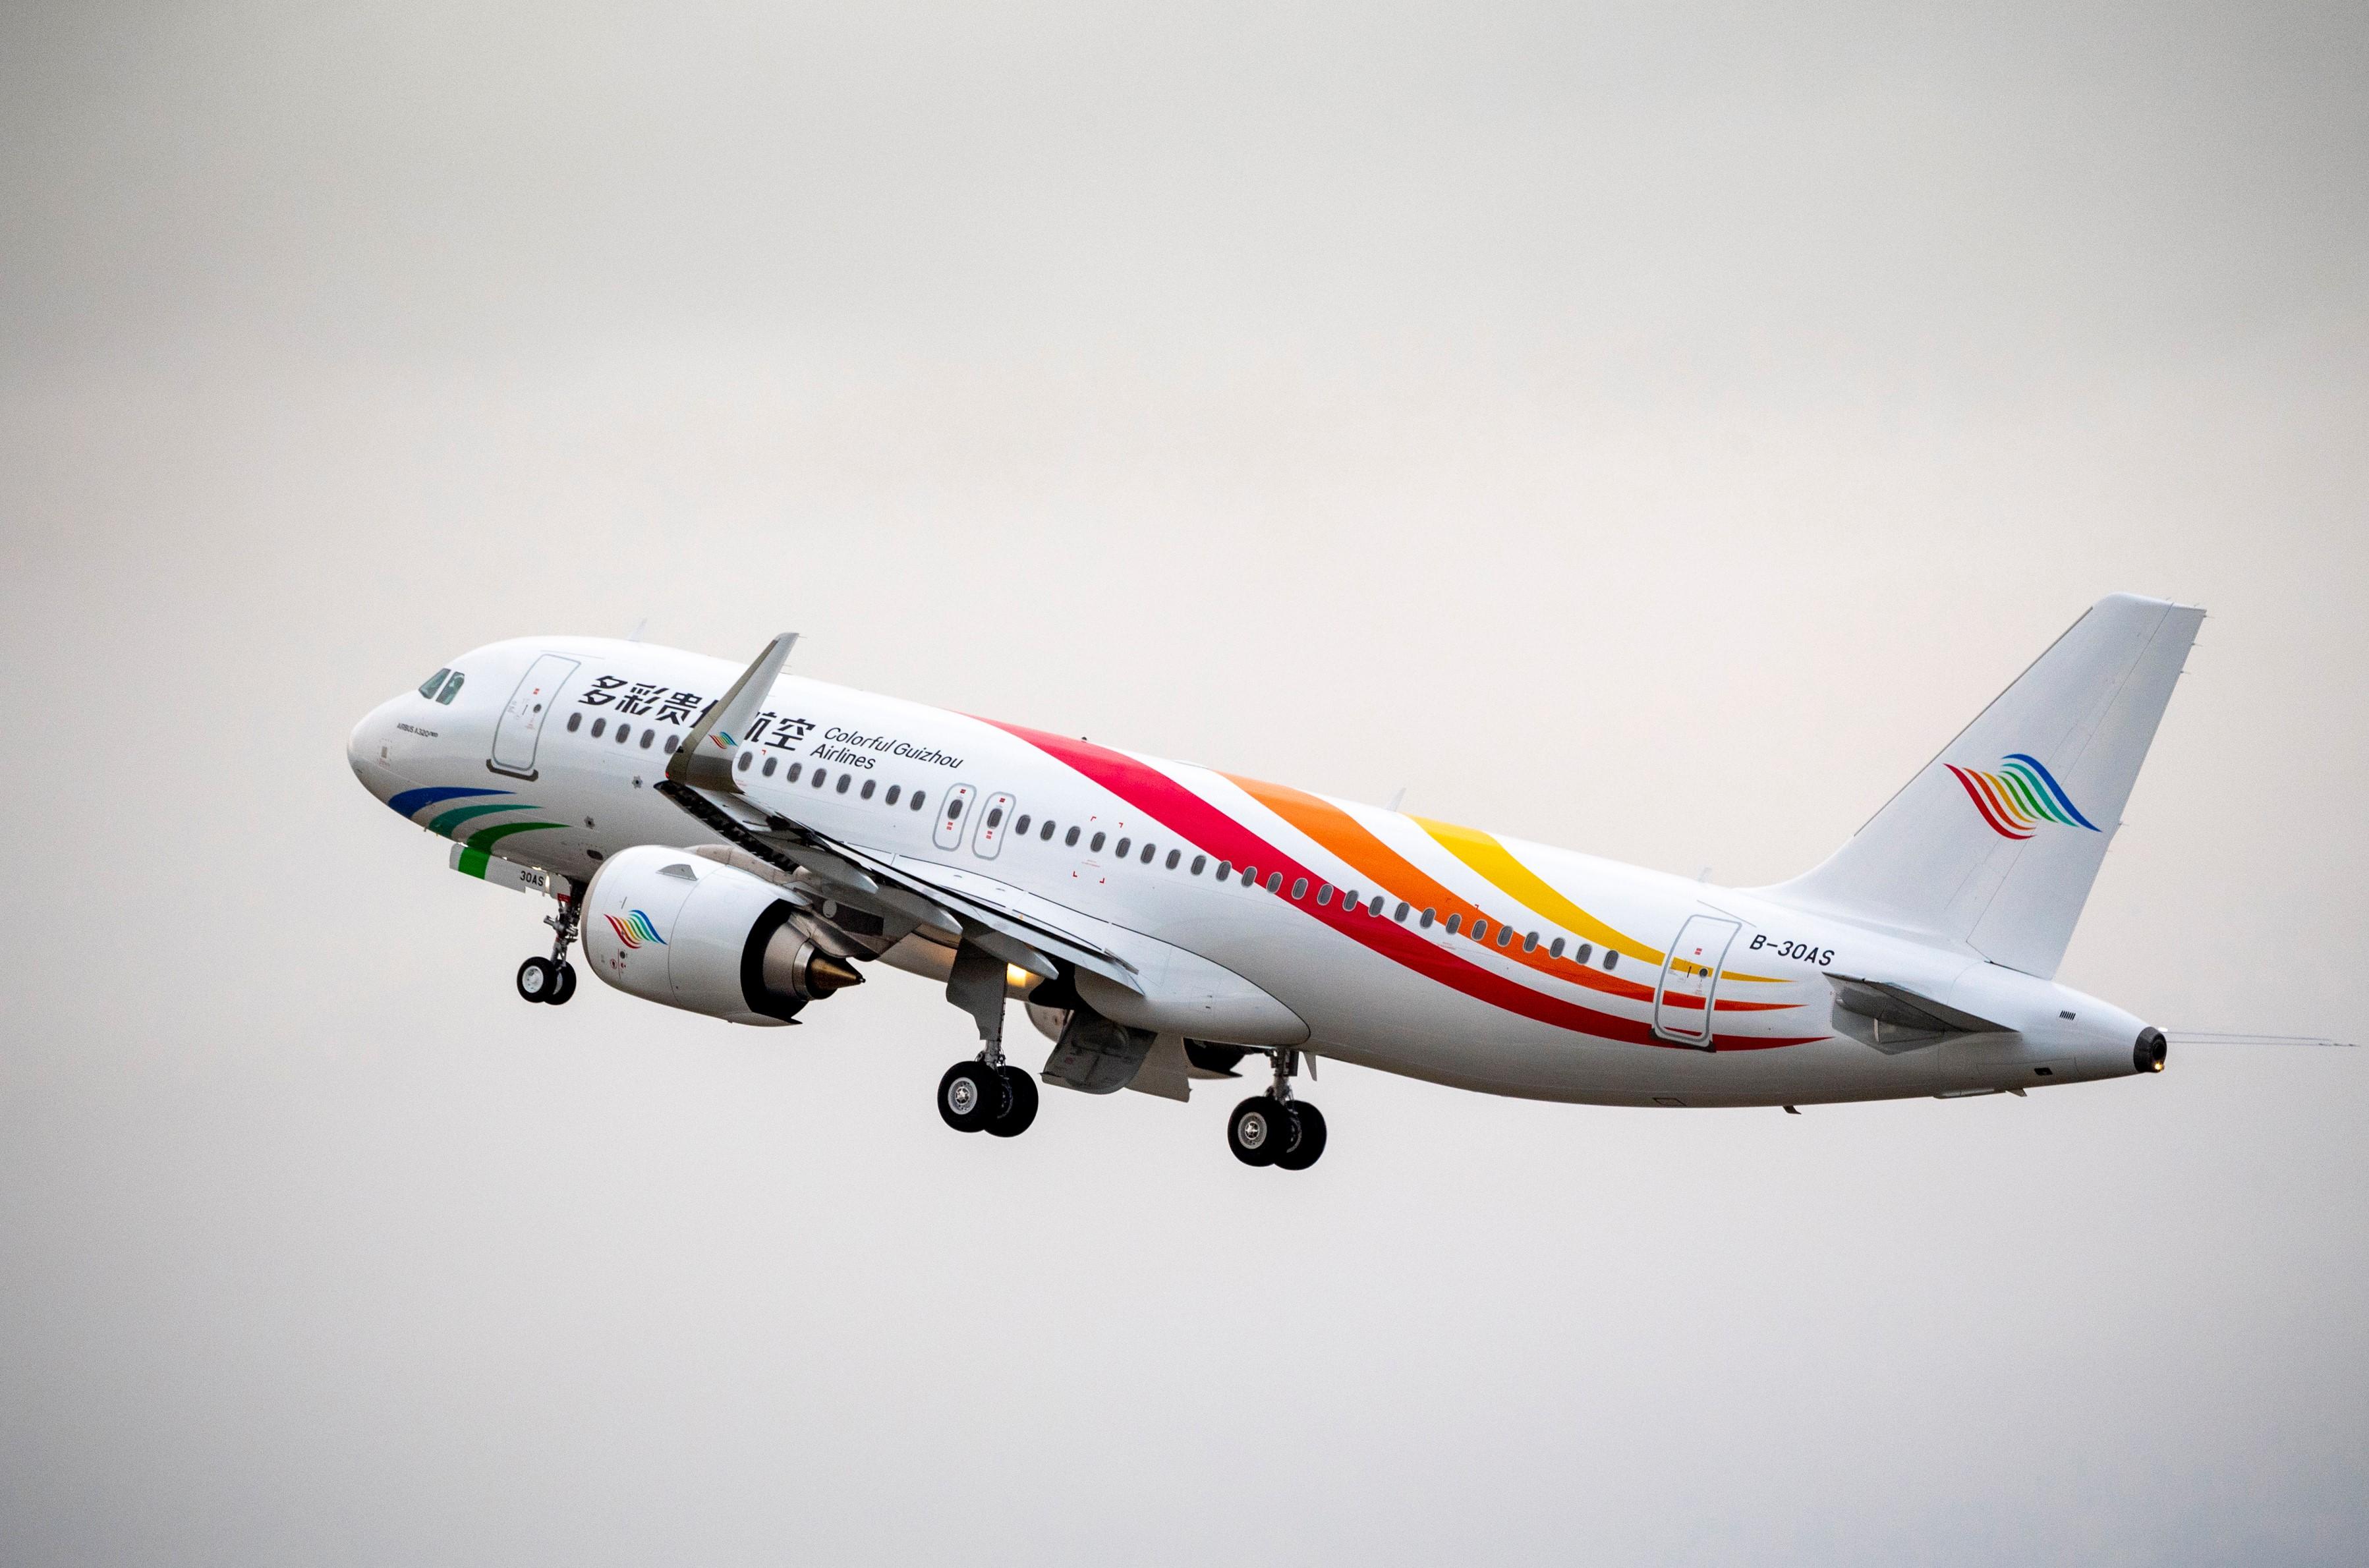 Colorful Guizhou Airlines A320neo